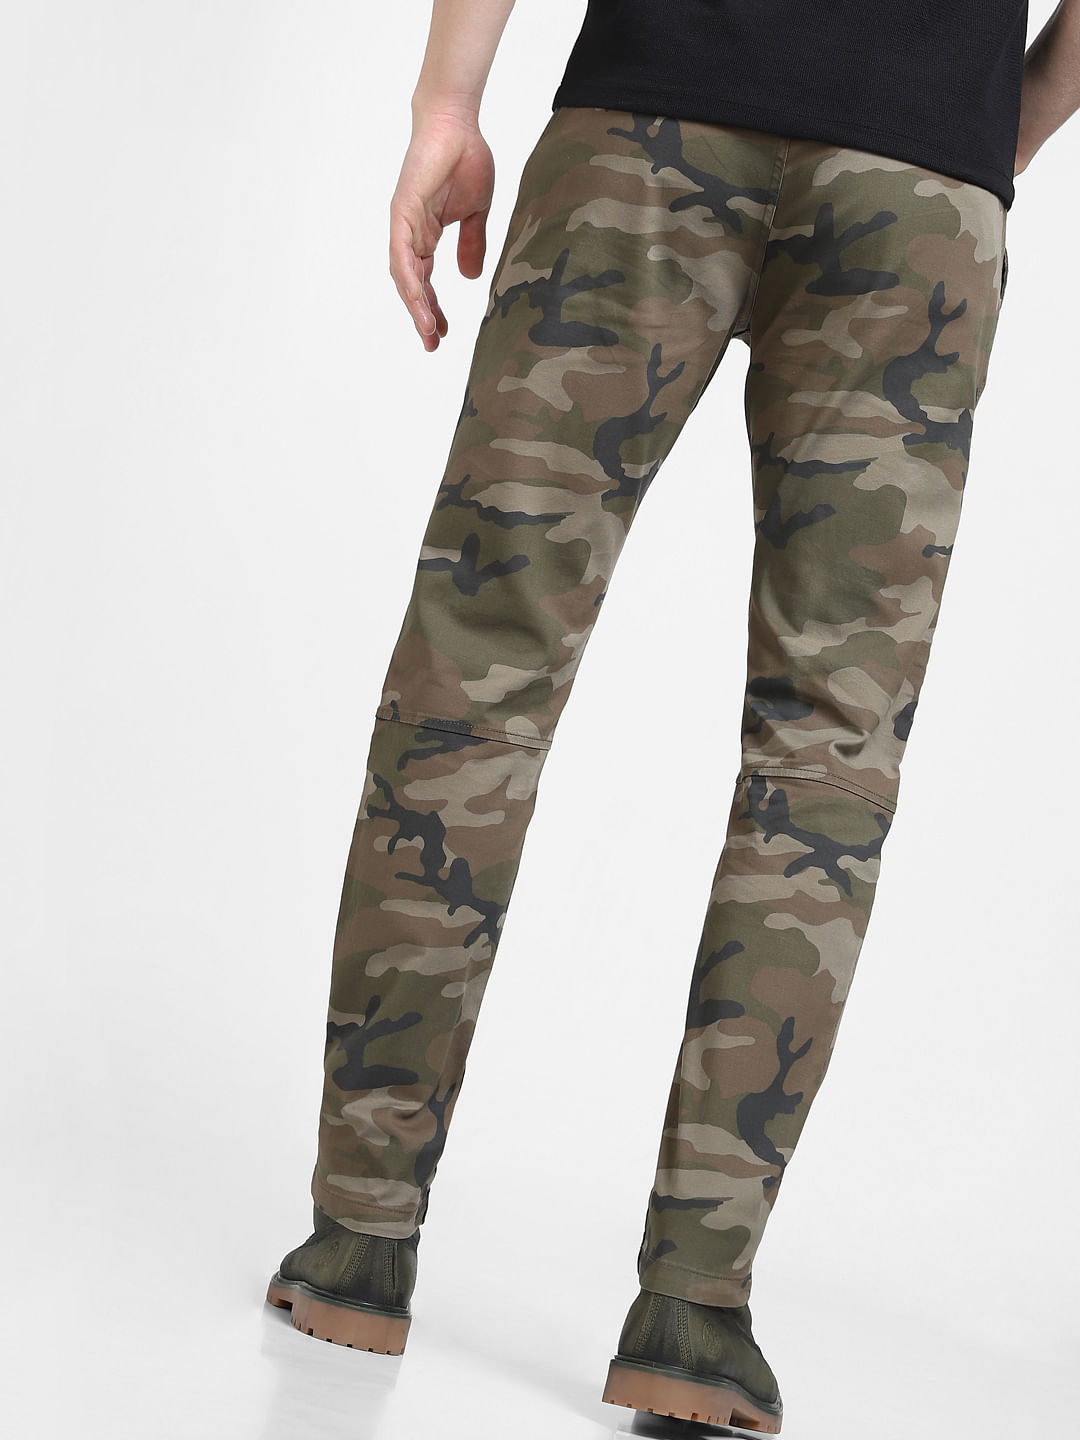 Men's Camouflage Cargo Pants Baggy Casual Elastic Waist Military Army Camo  Pants with Multi Pockets Comfy Lace-Up Pants(XXXXXL,Army Green) -  Walmart.com